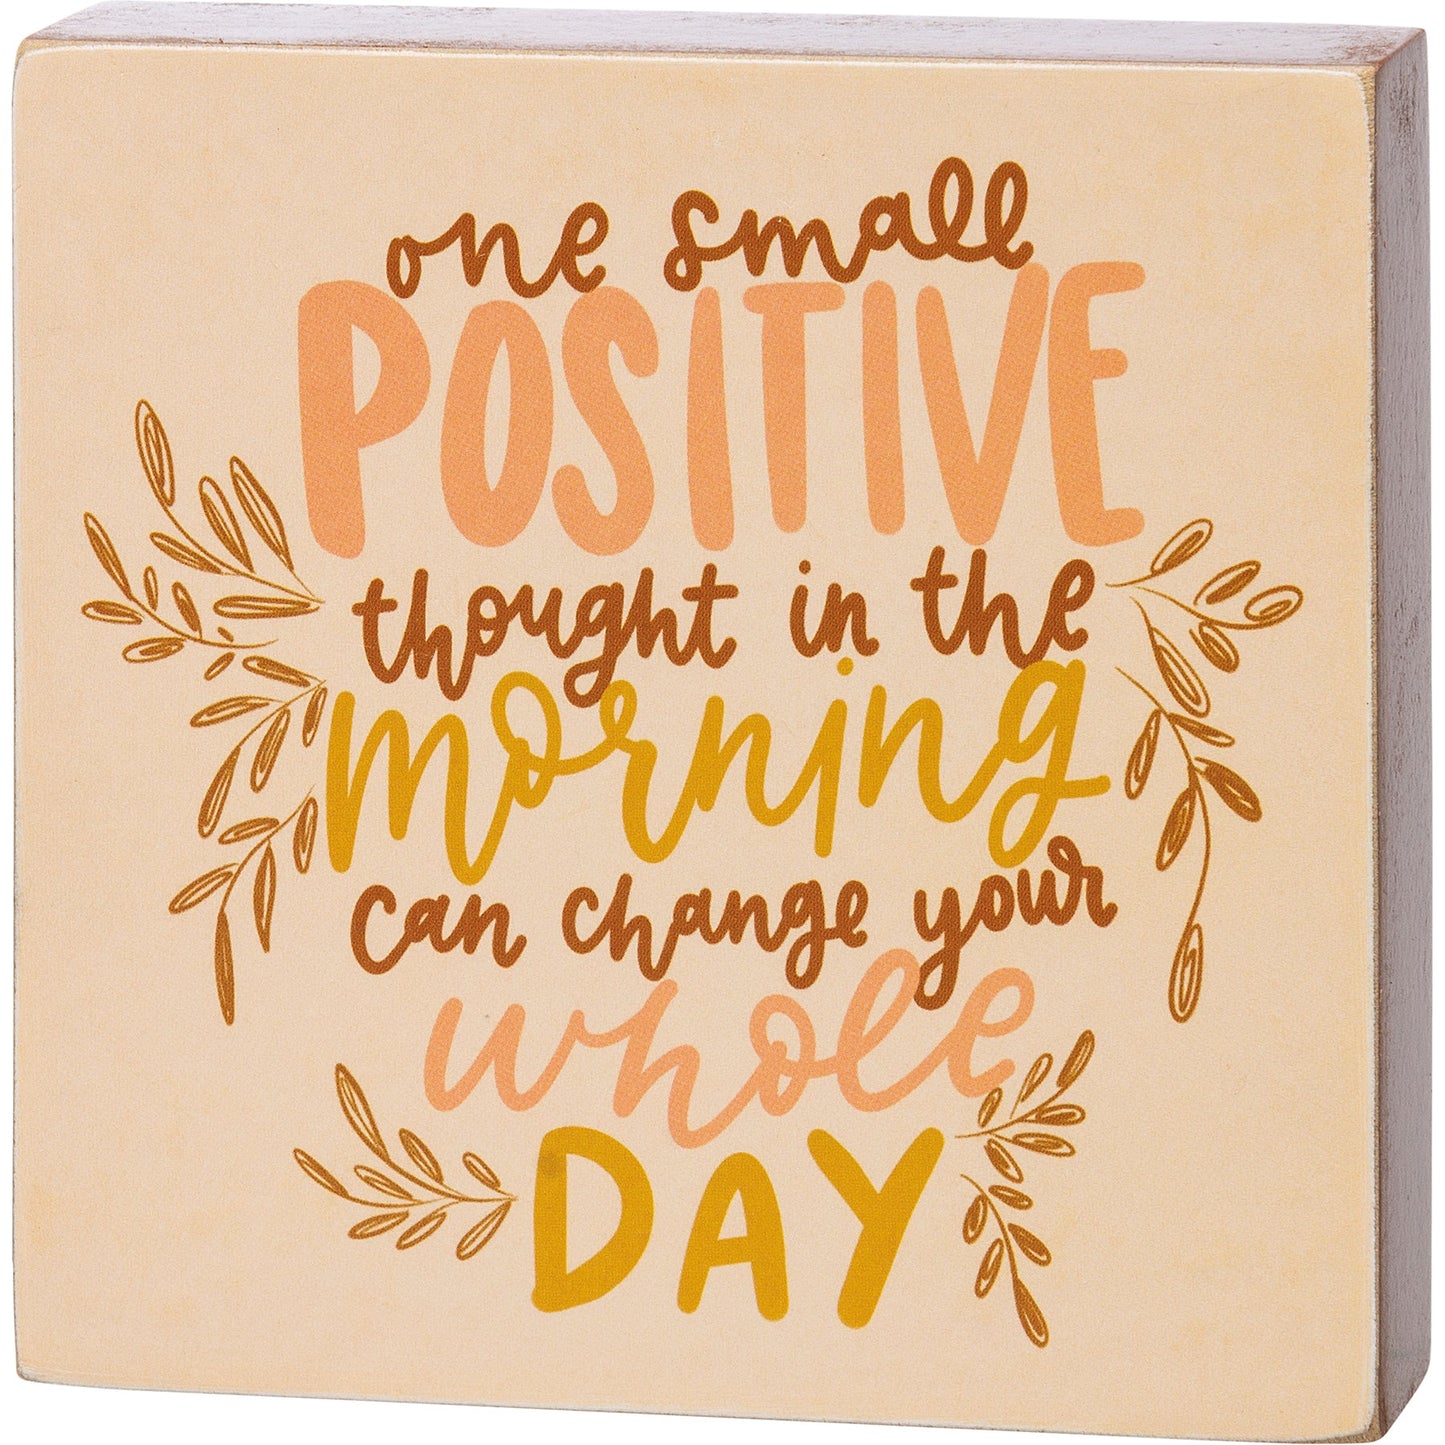 One Small Positive Thought In The Morning Wooden Block Sign | 4" Square